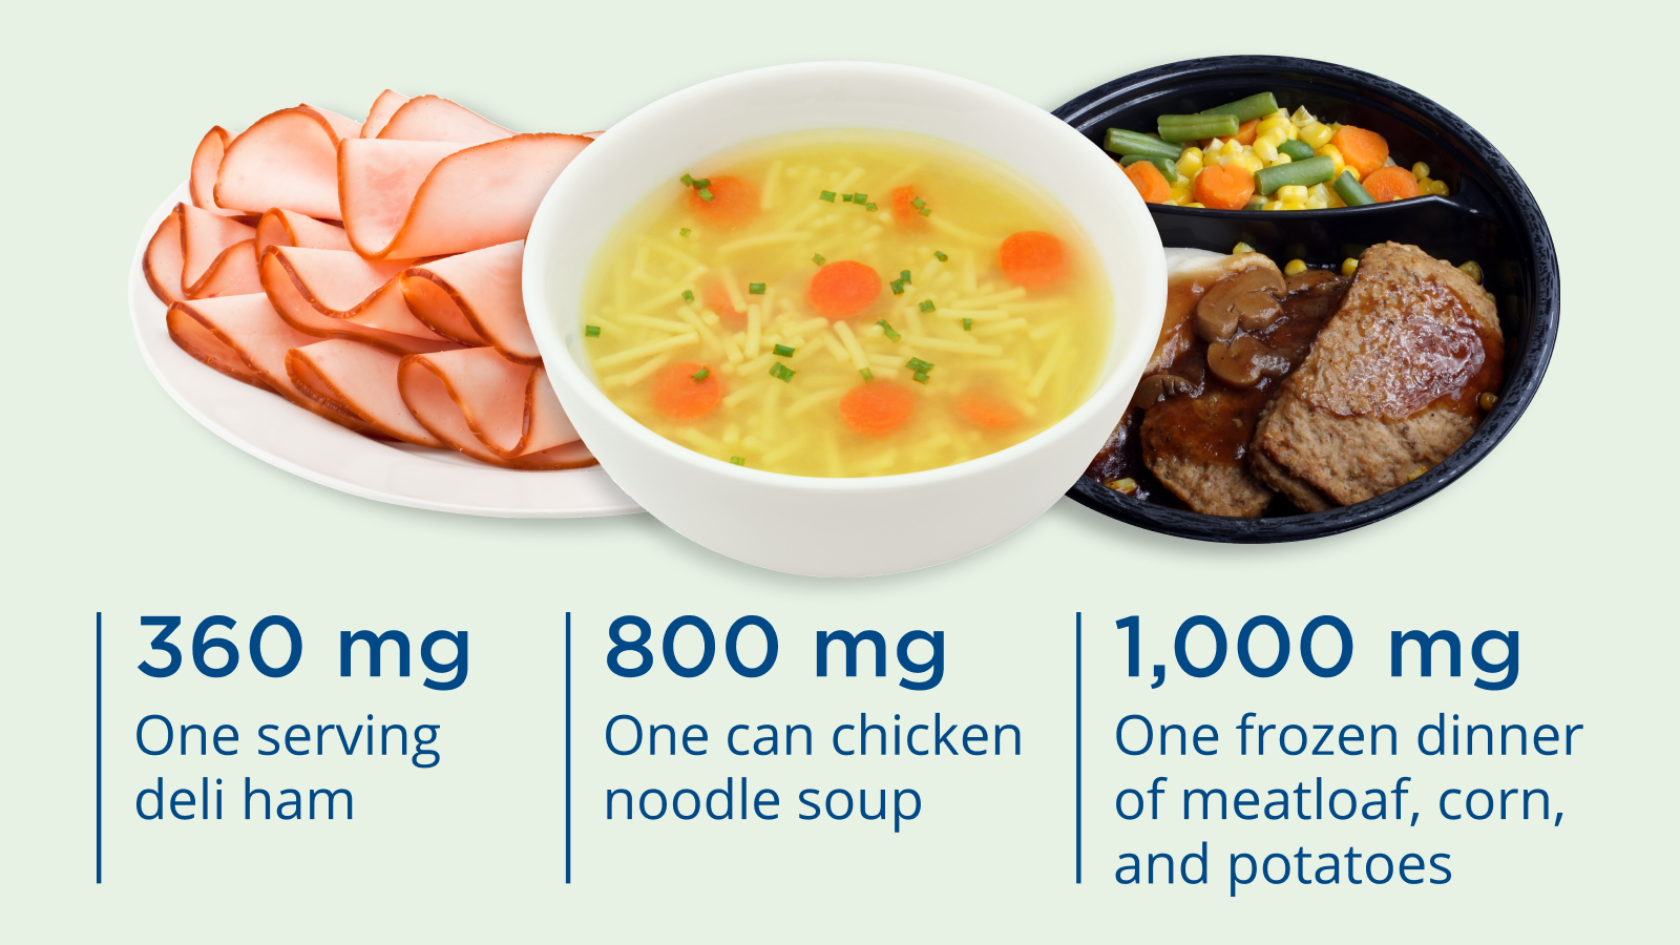 A graphic showing the following: one serving of deli ham has 360 milligrams of sodium; one can of chicken noodle soup has 800 milligrams of sodium; and one meatloaf and vegetables frozen dinner has 1,000 milligrams of sodium.